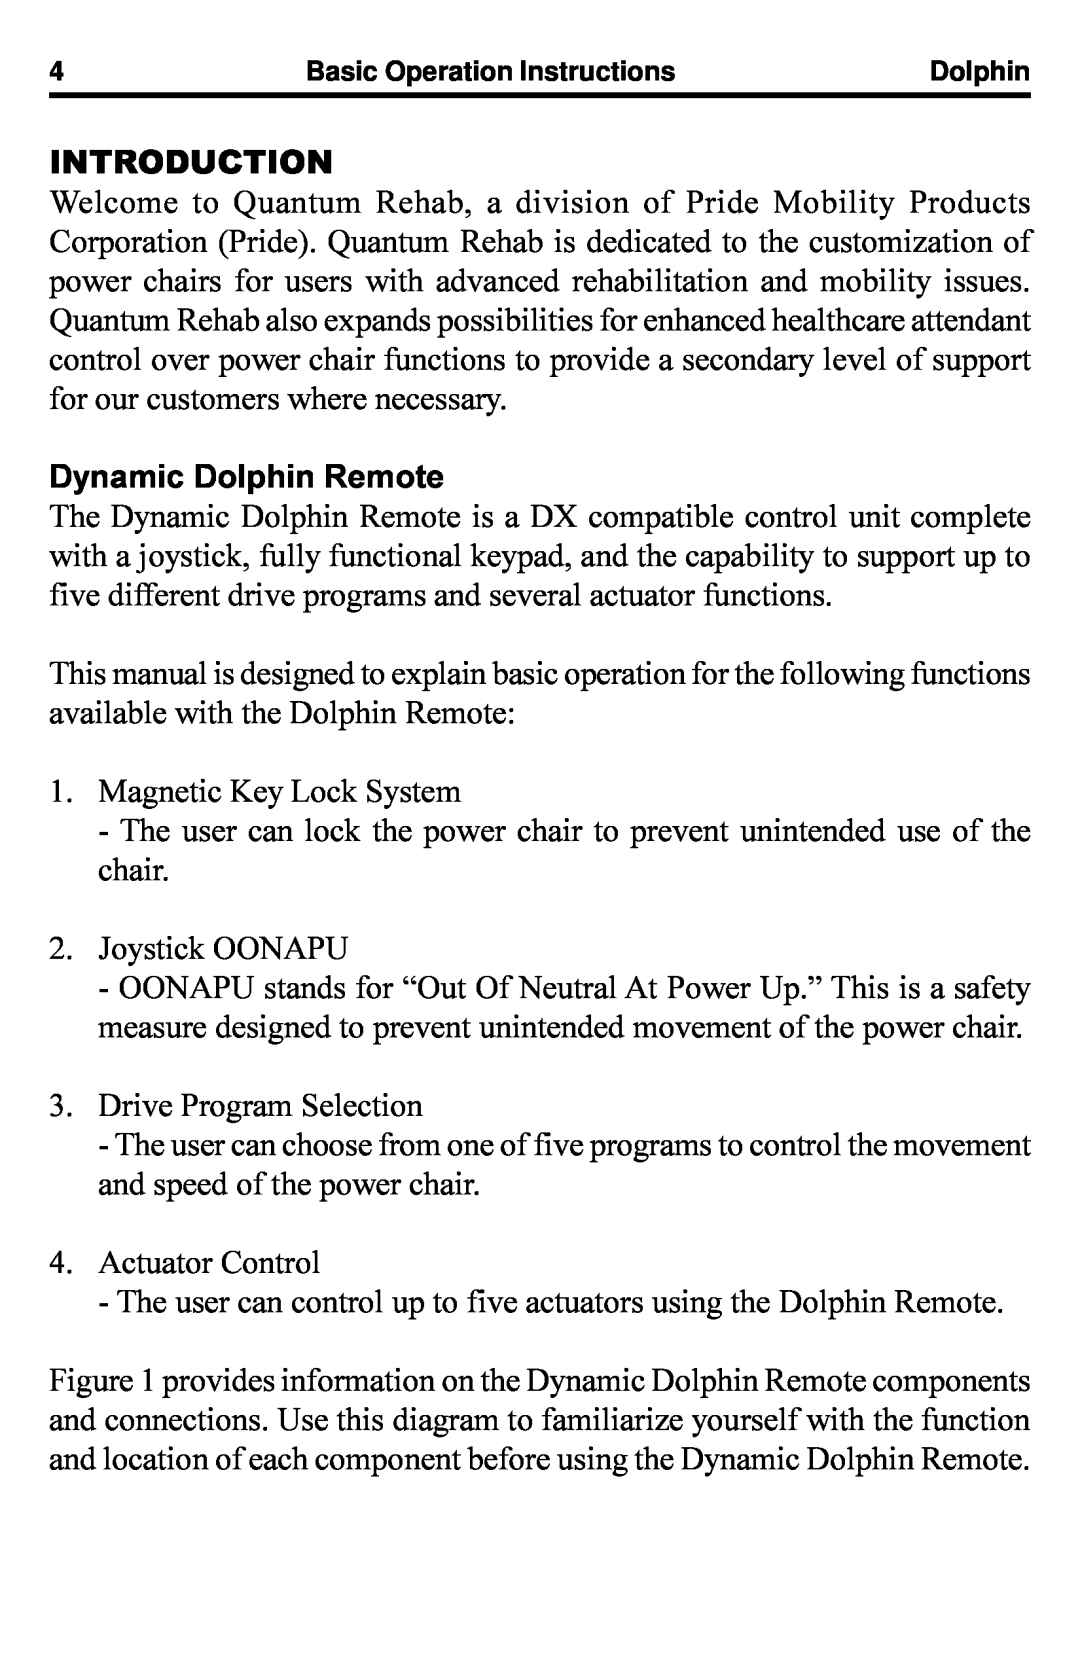 Quantum Dynamic Dolphin Remote manual Introduction 